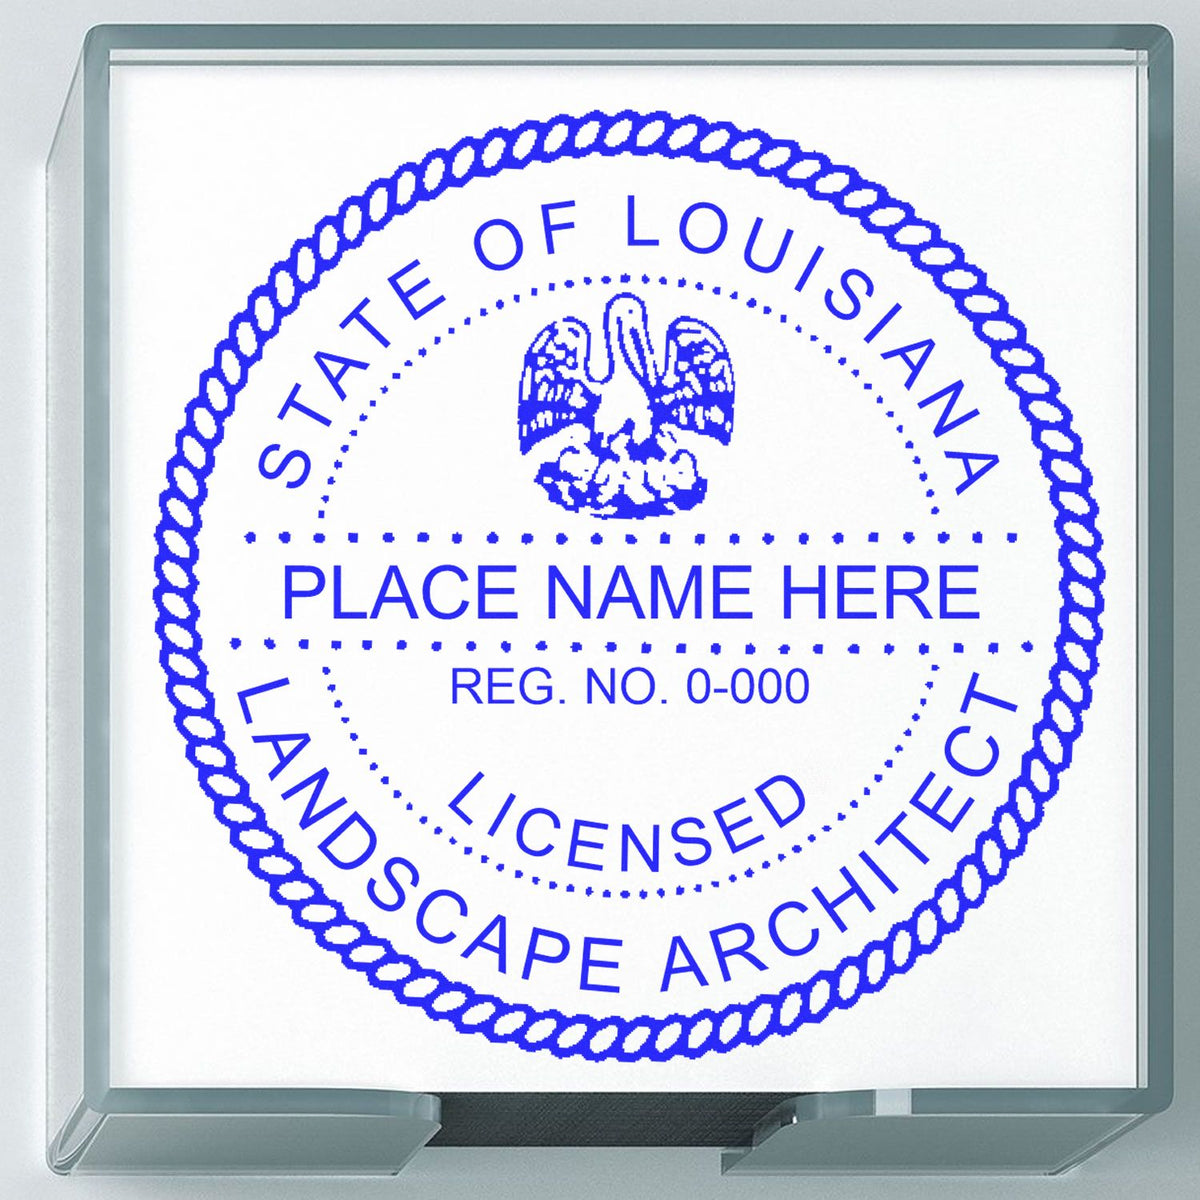 The Slim Pre-Inked Louisiana Landscape Architect Seal Stamp stamp impression comes to life with a crisp, detailed photo on paper - showcasing true professional quality.